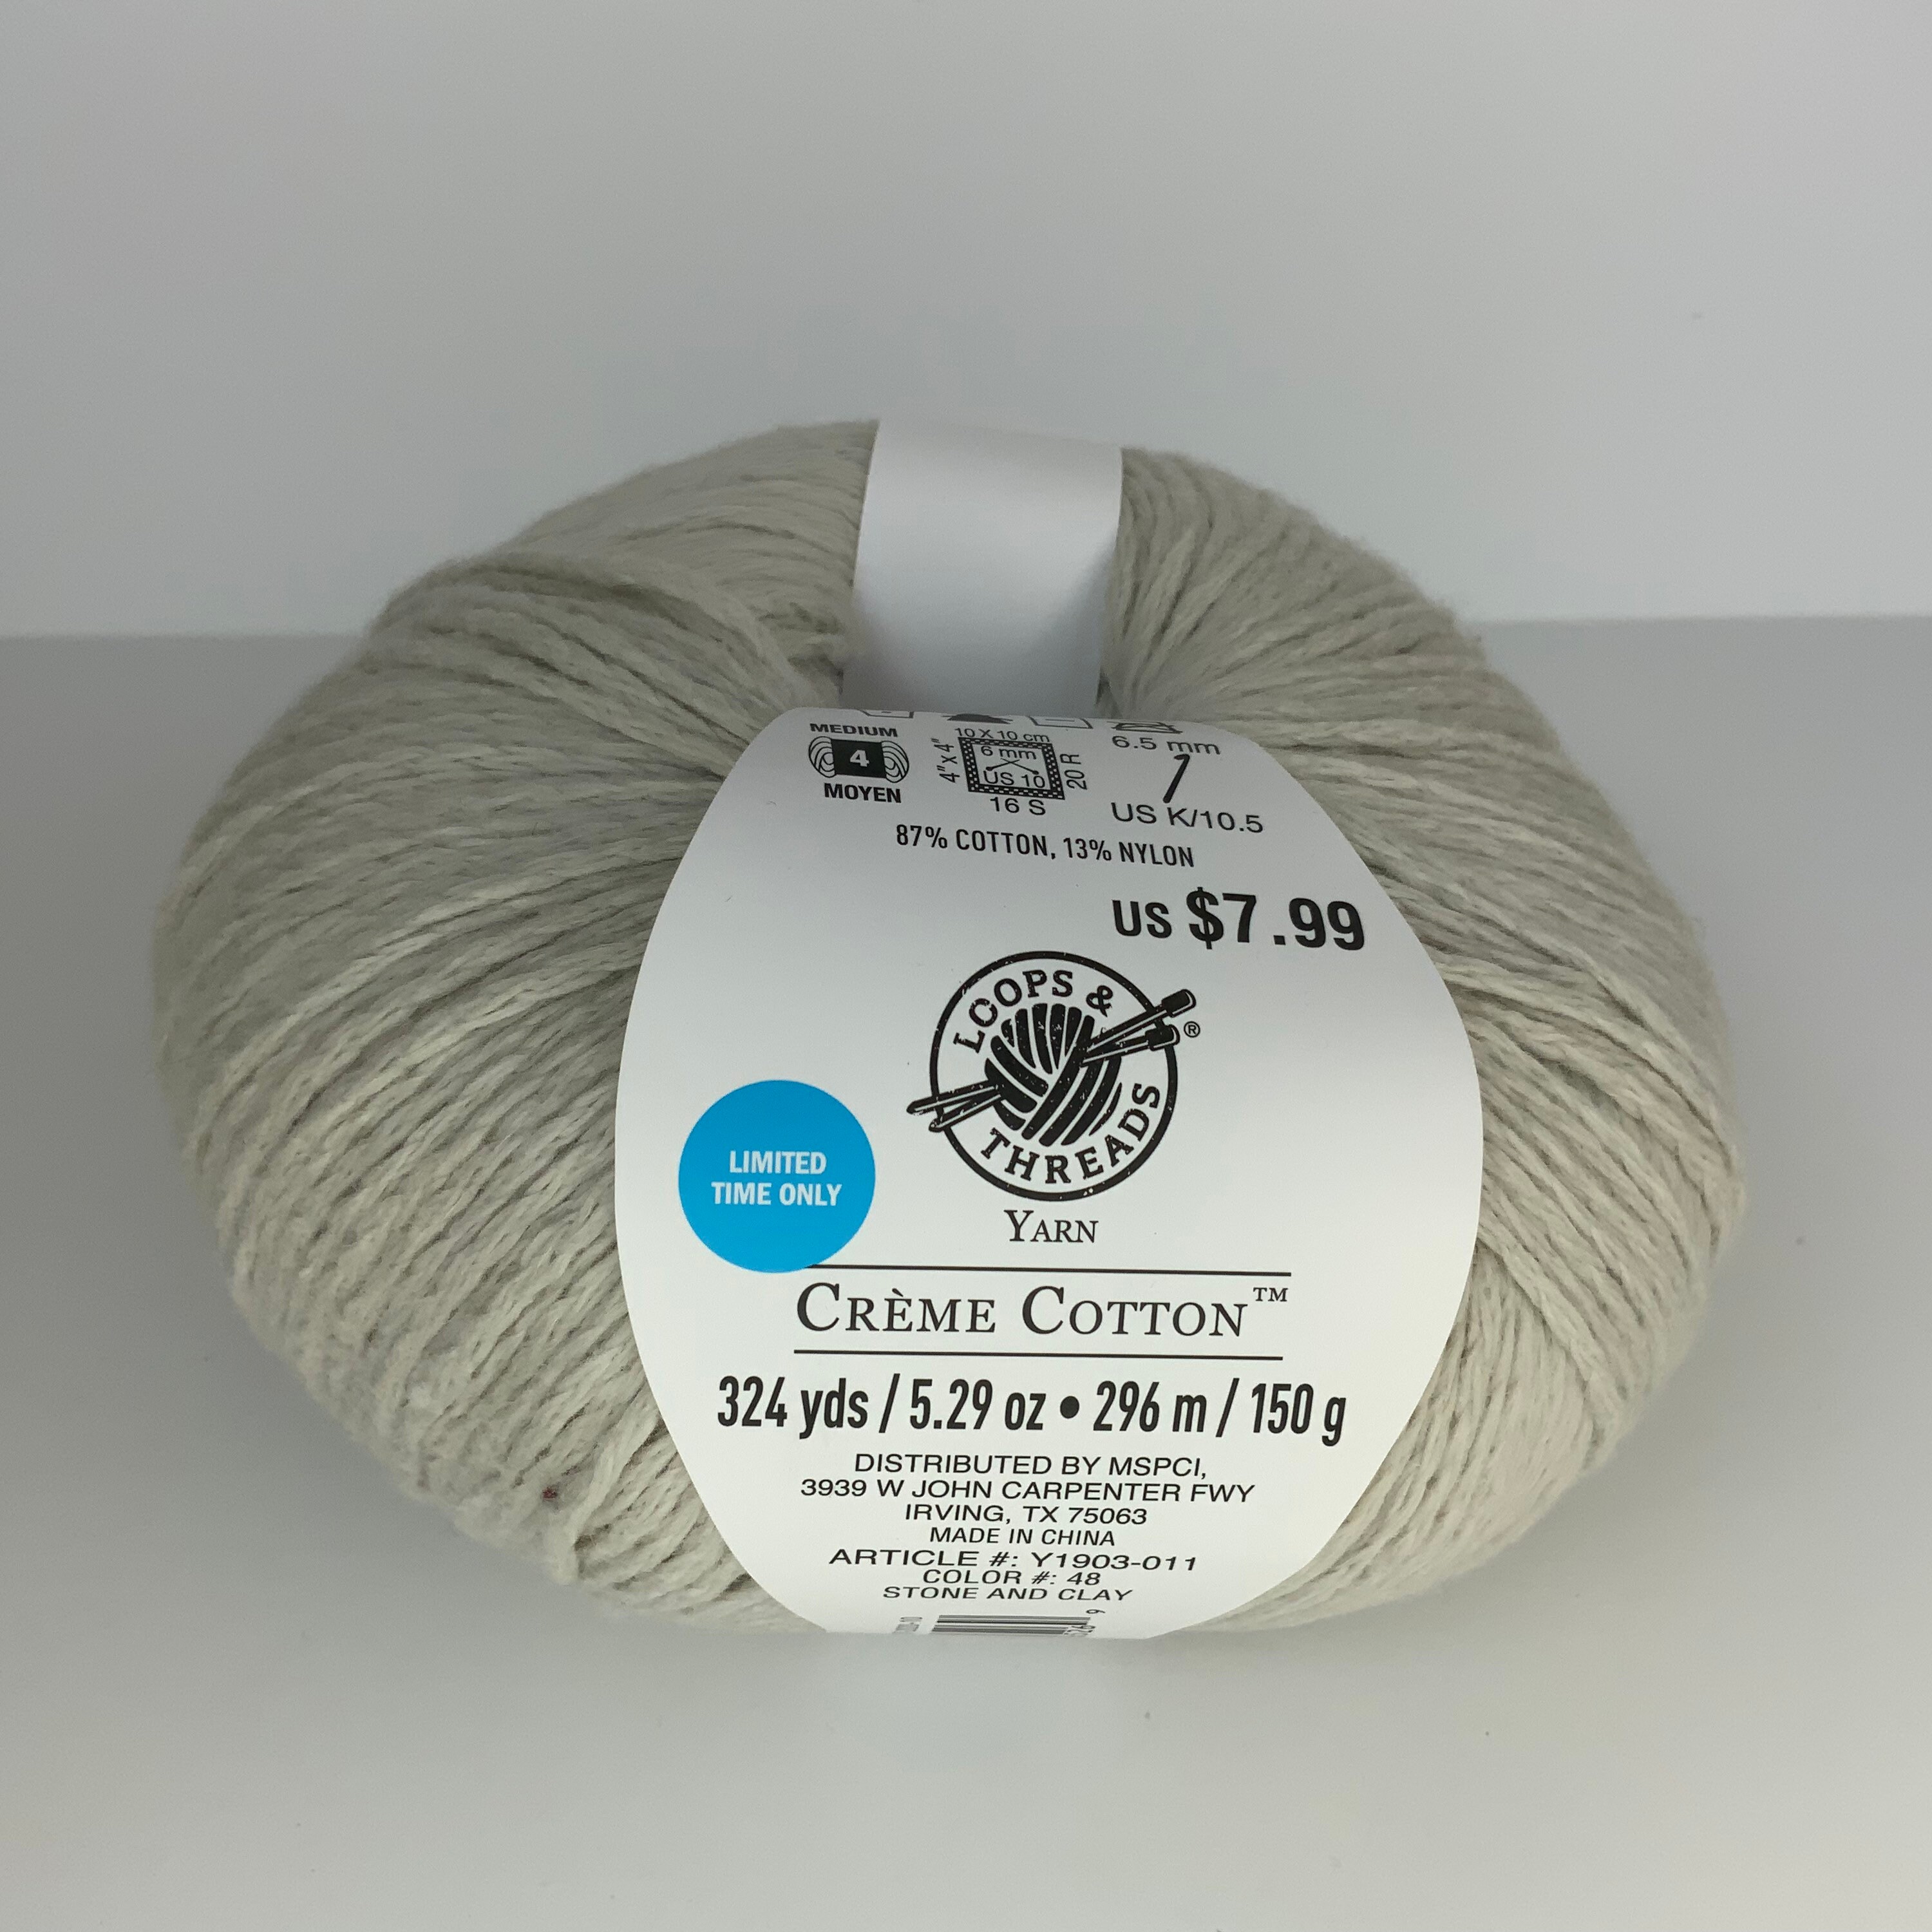 For The Home Cording Yarn